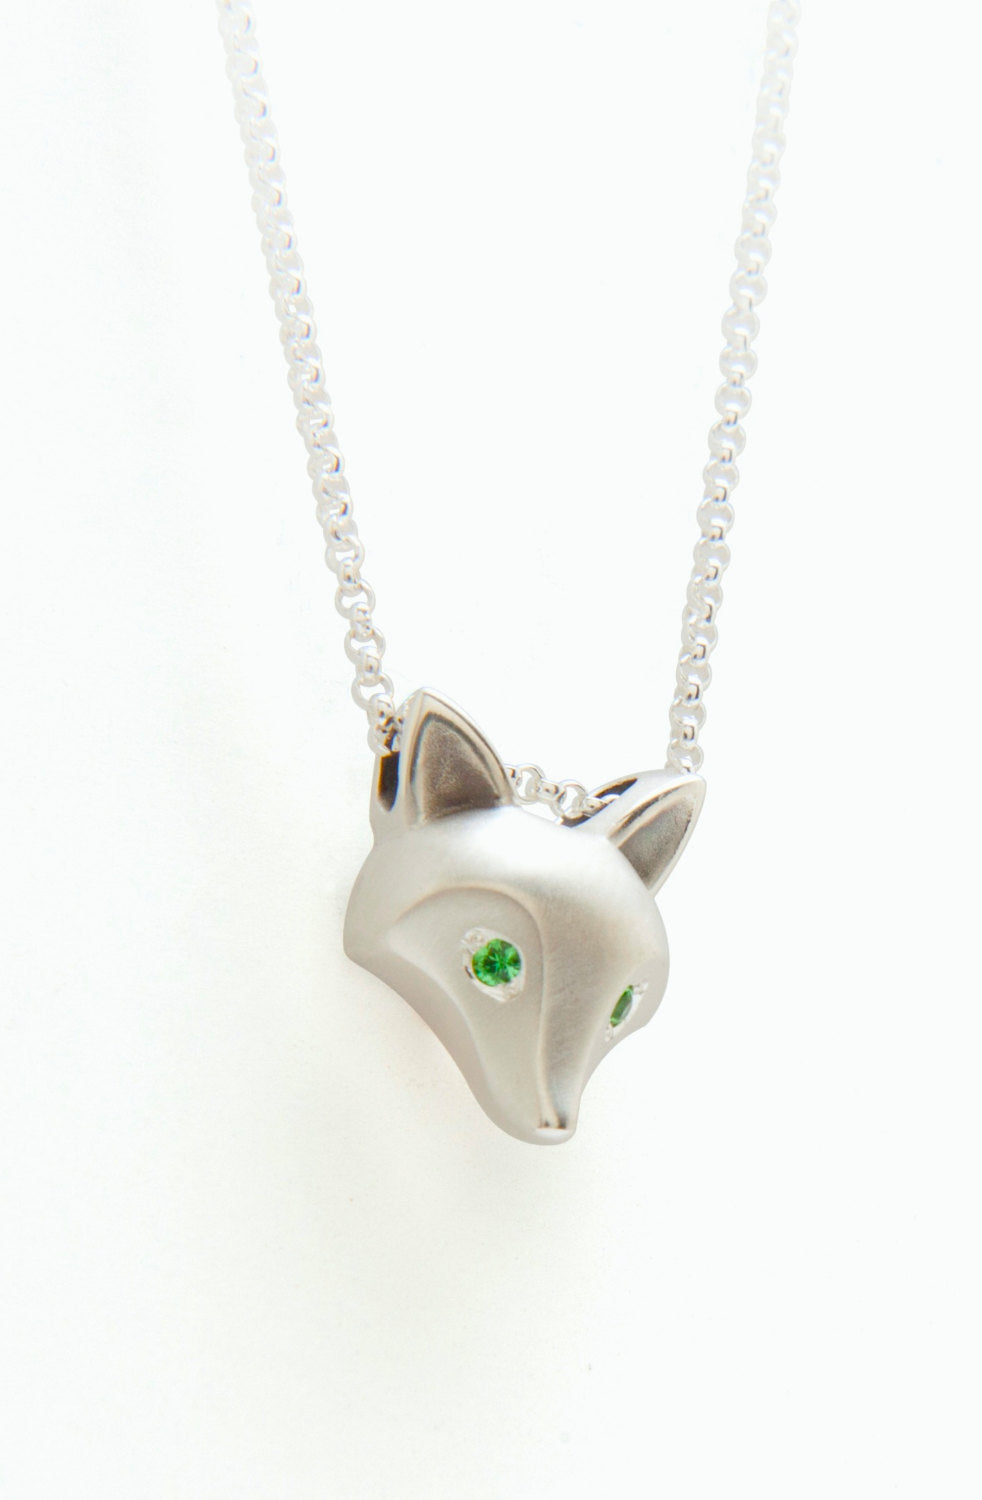 silver fox pendant with diamond eyes and chain satin finish,